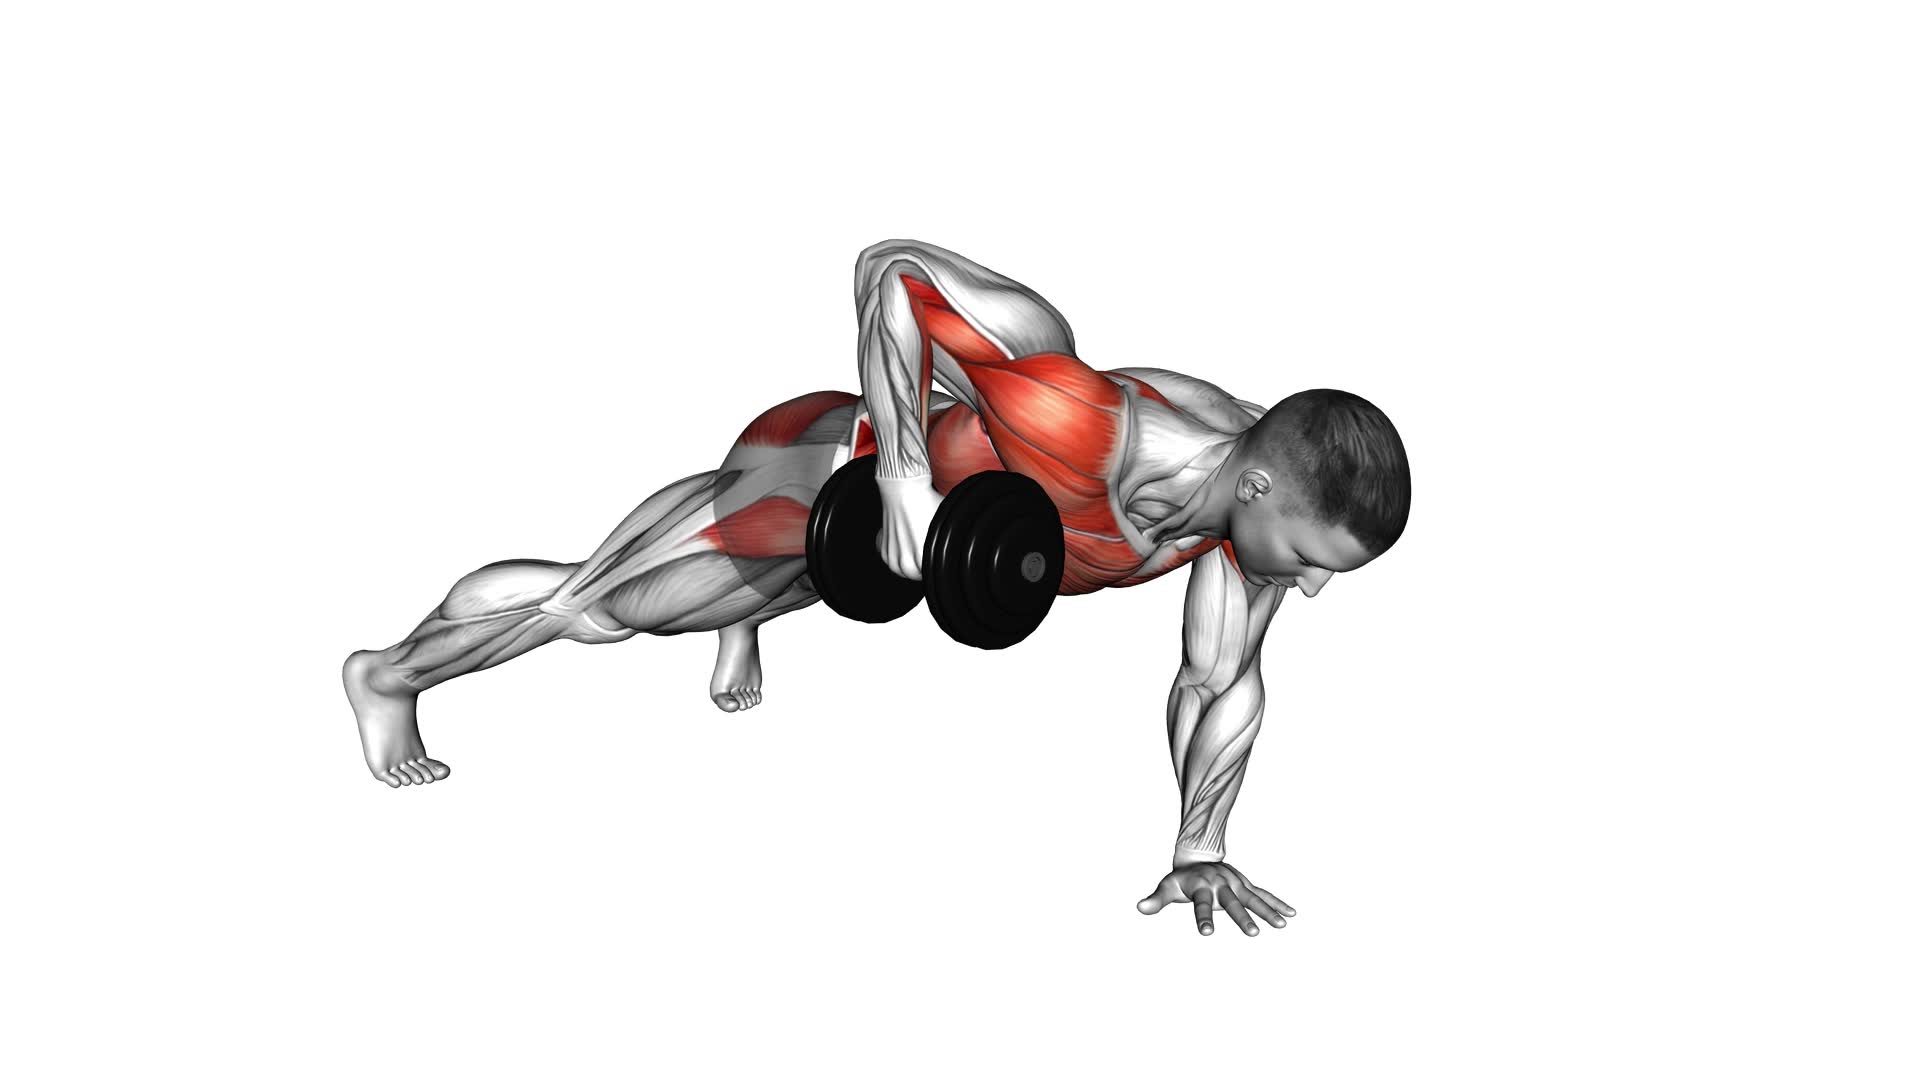 Dumbbell Plank Row (male) - Video Exercise Guide & Tips